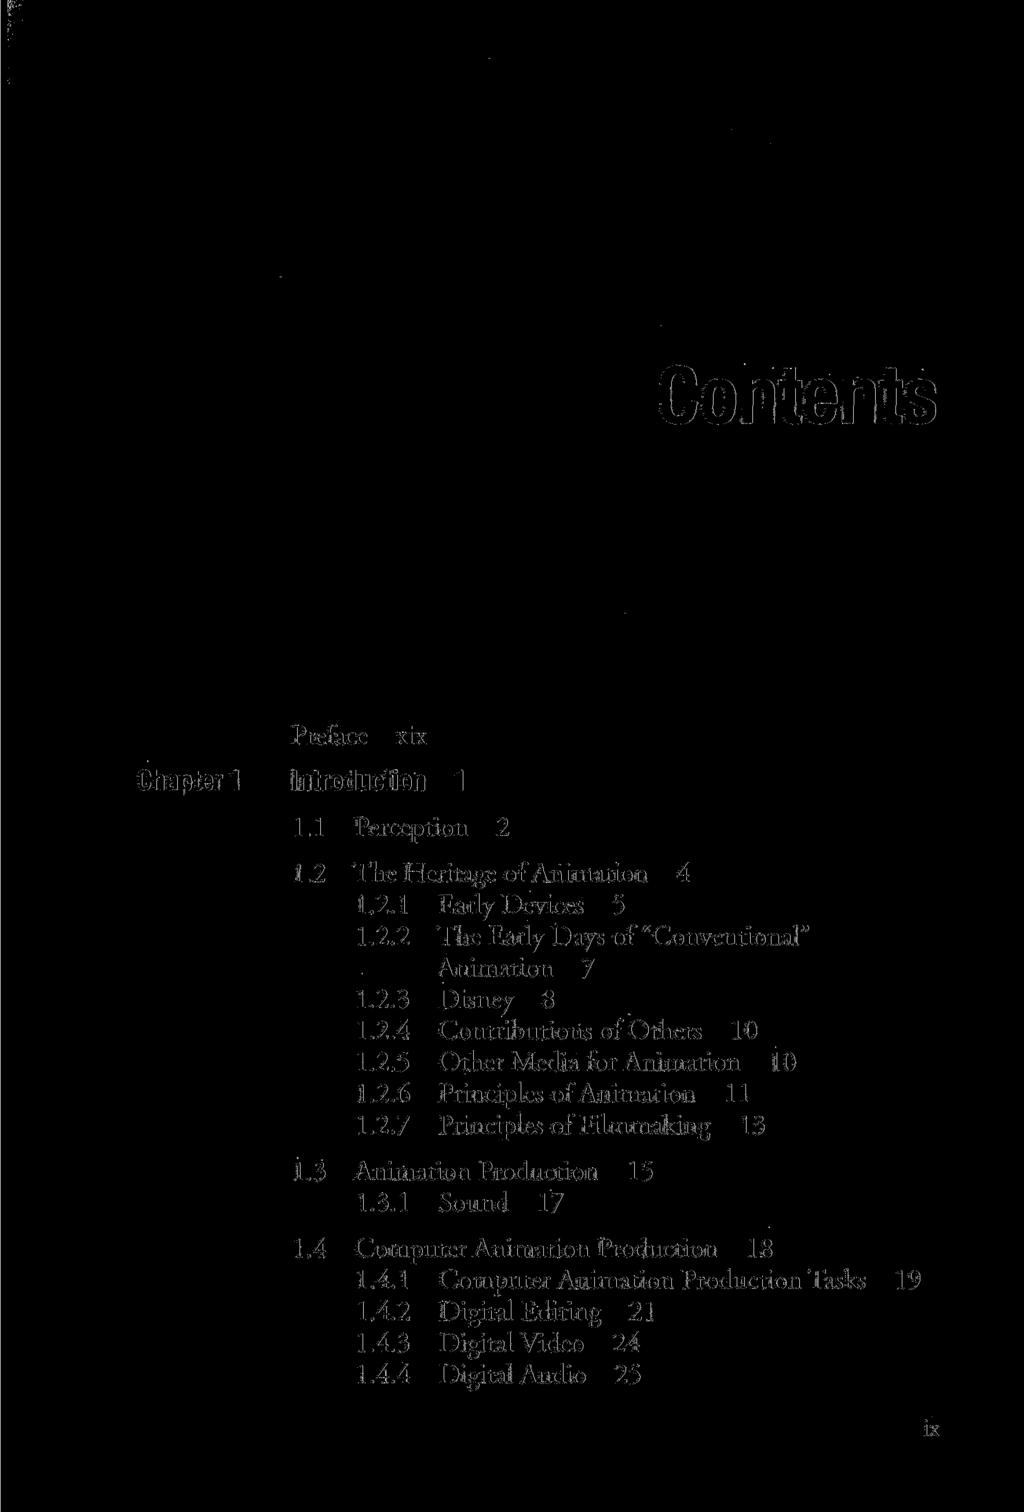 Preface xix Chapter 1 Introductioh 1 1.1 Perception 2 1.2 The Heritage of Animation 4 1.2.1 Early Devices 5 1.2.2 The Early Days of "Conventional" Animation 7 1.2.3 Disney 8 1.2.4 Contributions of Others 10 1.